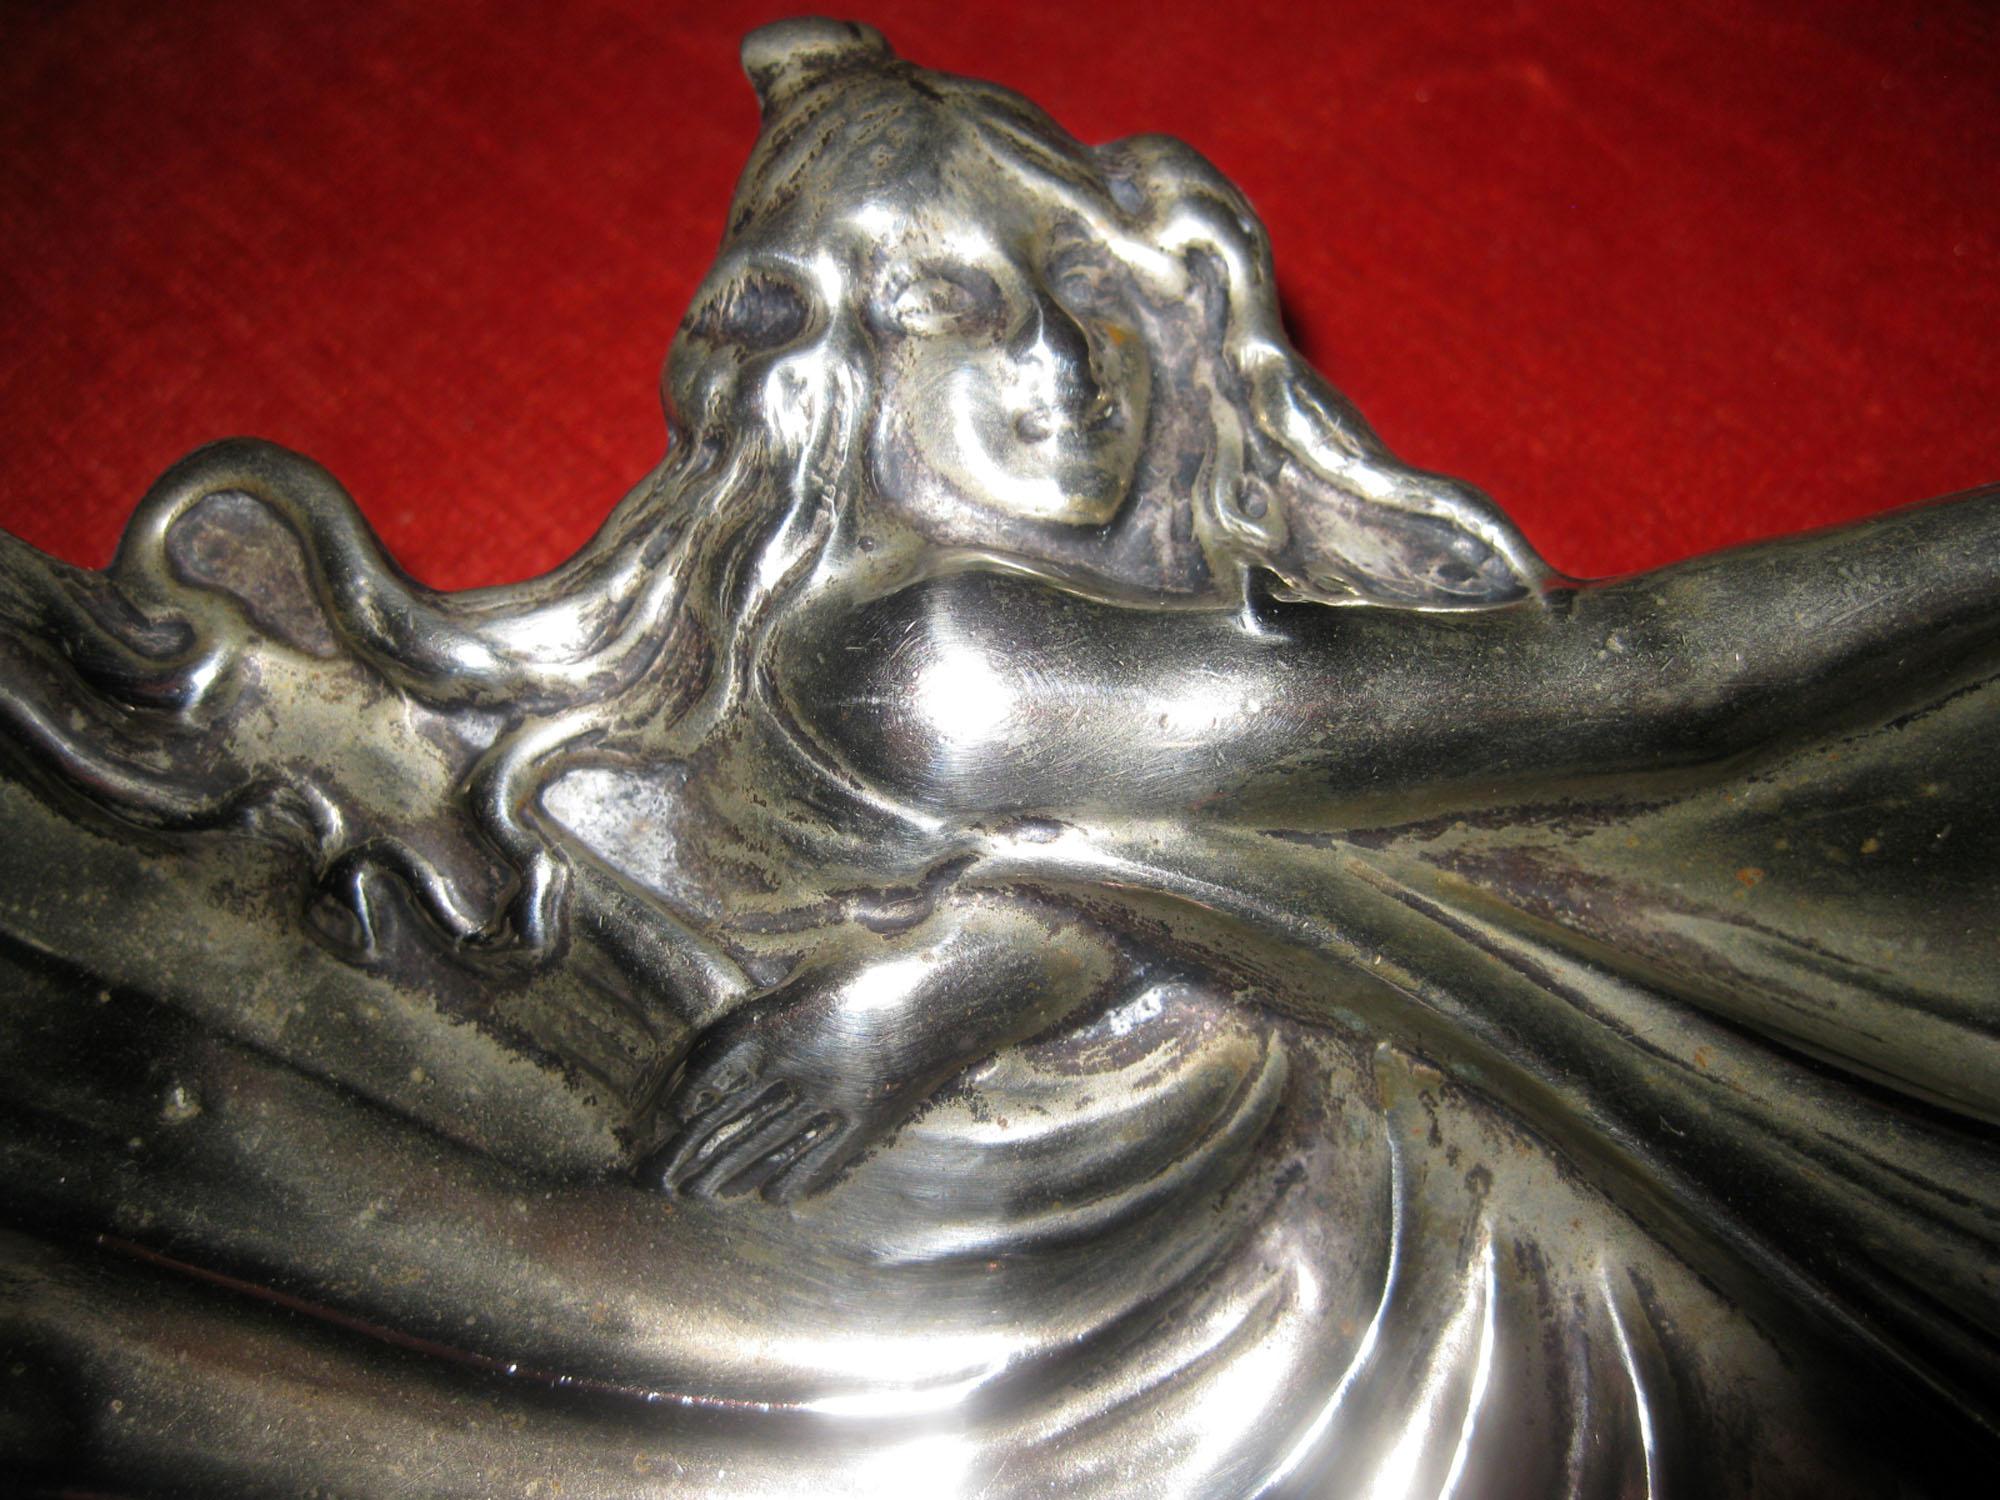 This small interesting Art Nouveau silver footed tray depicts a long-haired maiden swirling her dress in the shape of butterfly wings. It rests on three round feet. It is hallmarked Meneses which is a Spanish silversmith founded in 1840 and has been